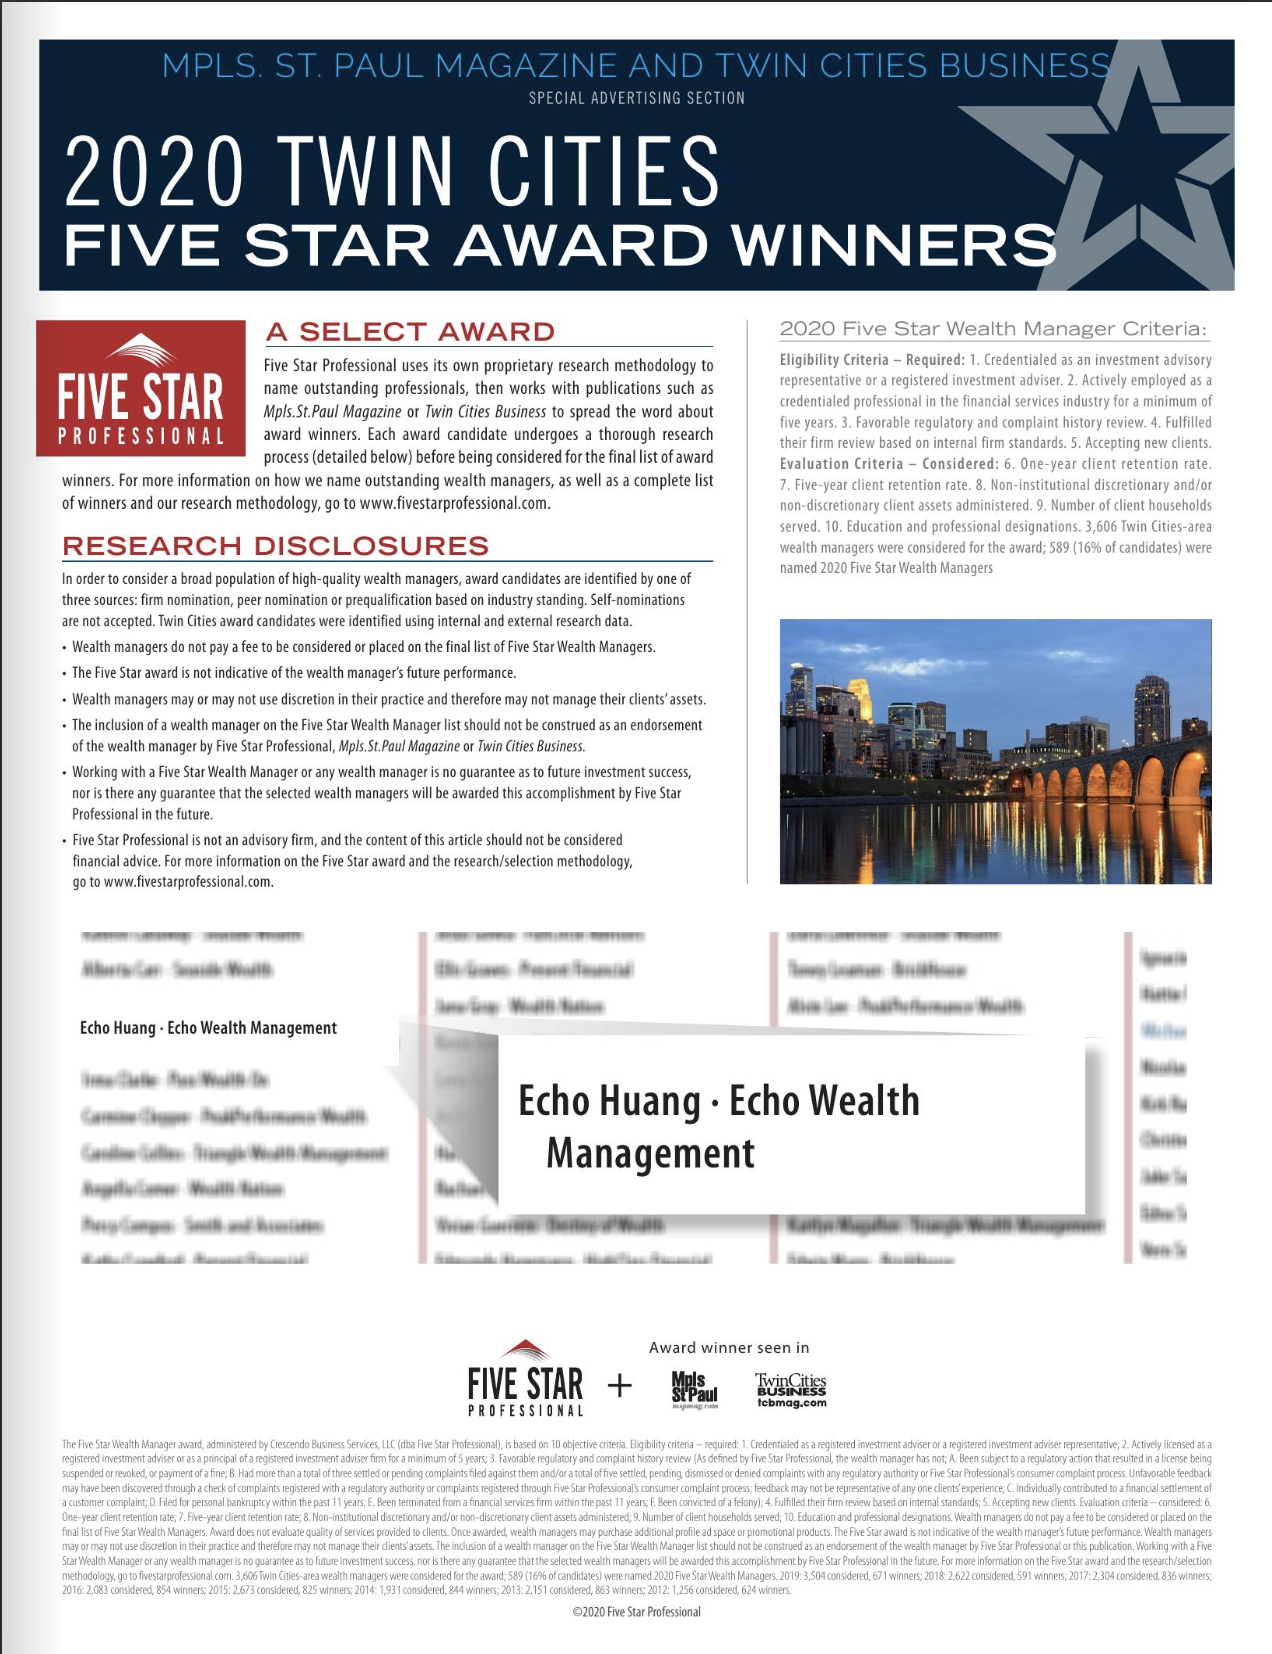 Echo Huang, CFA, CFP®, CPA Awarded the Five Star Wealth Manager Award for 2020!